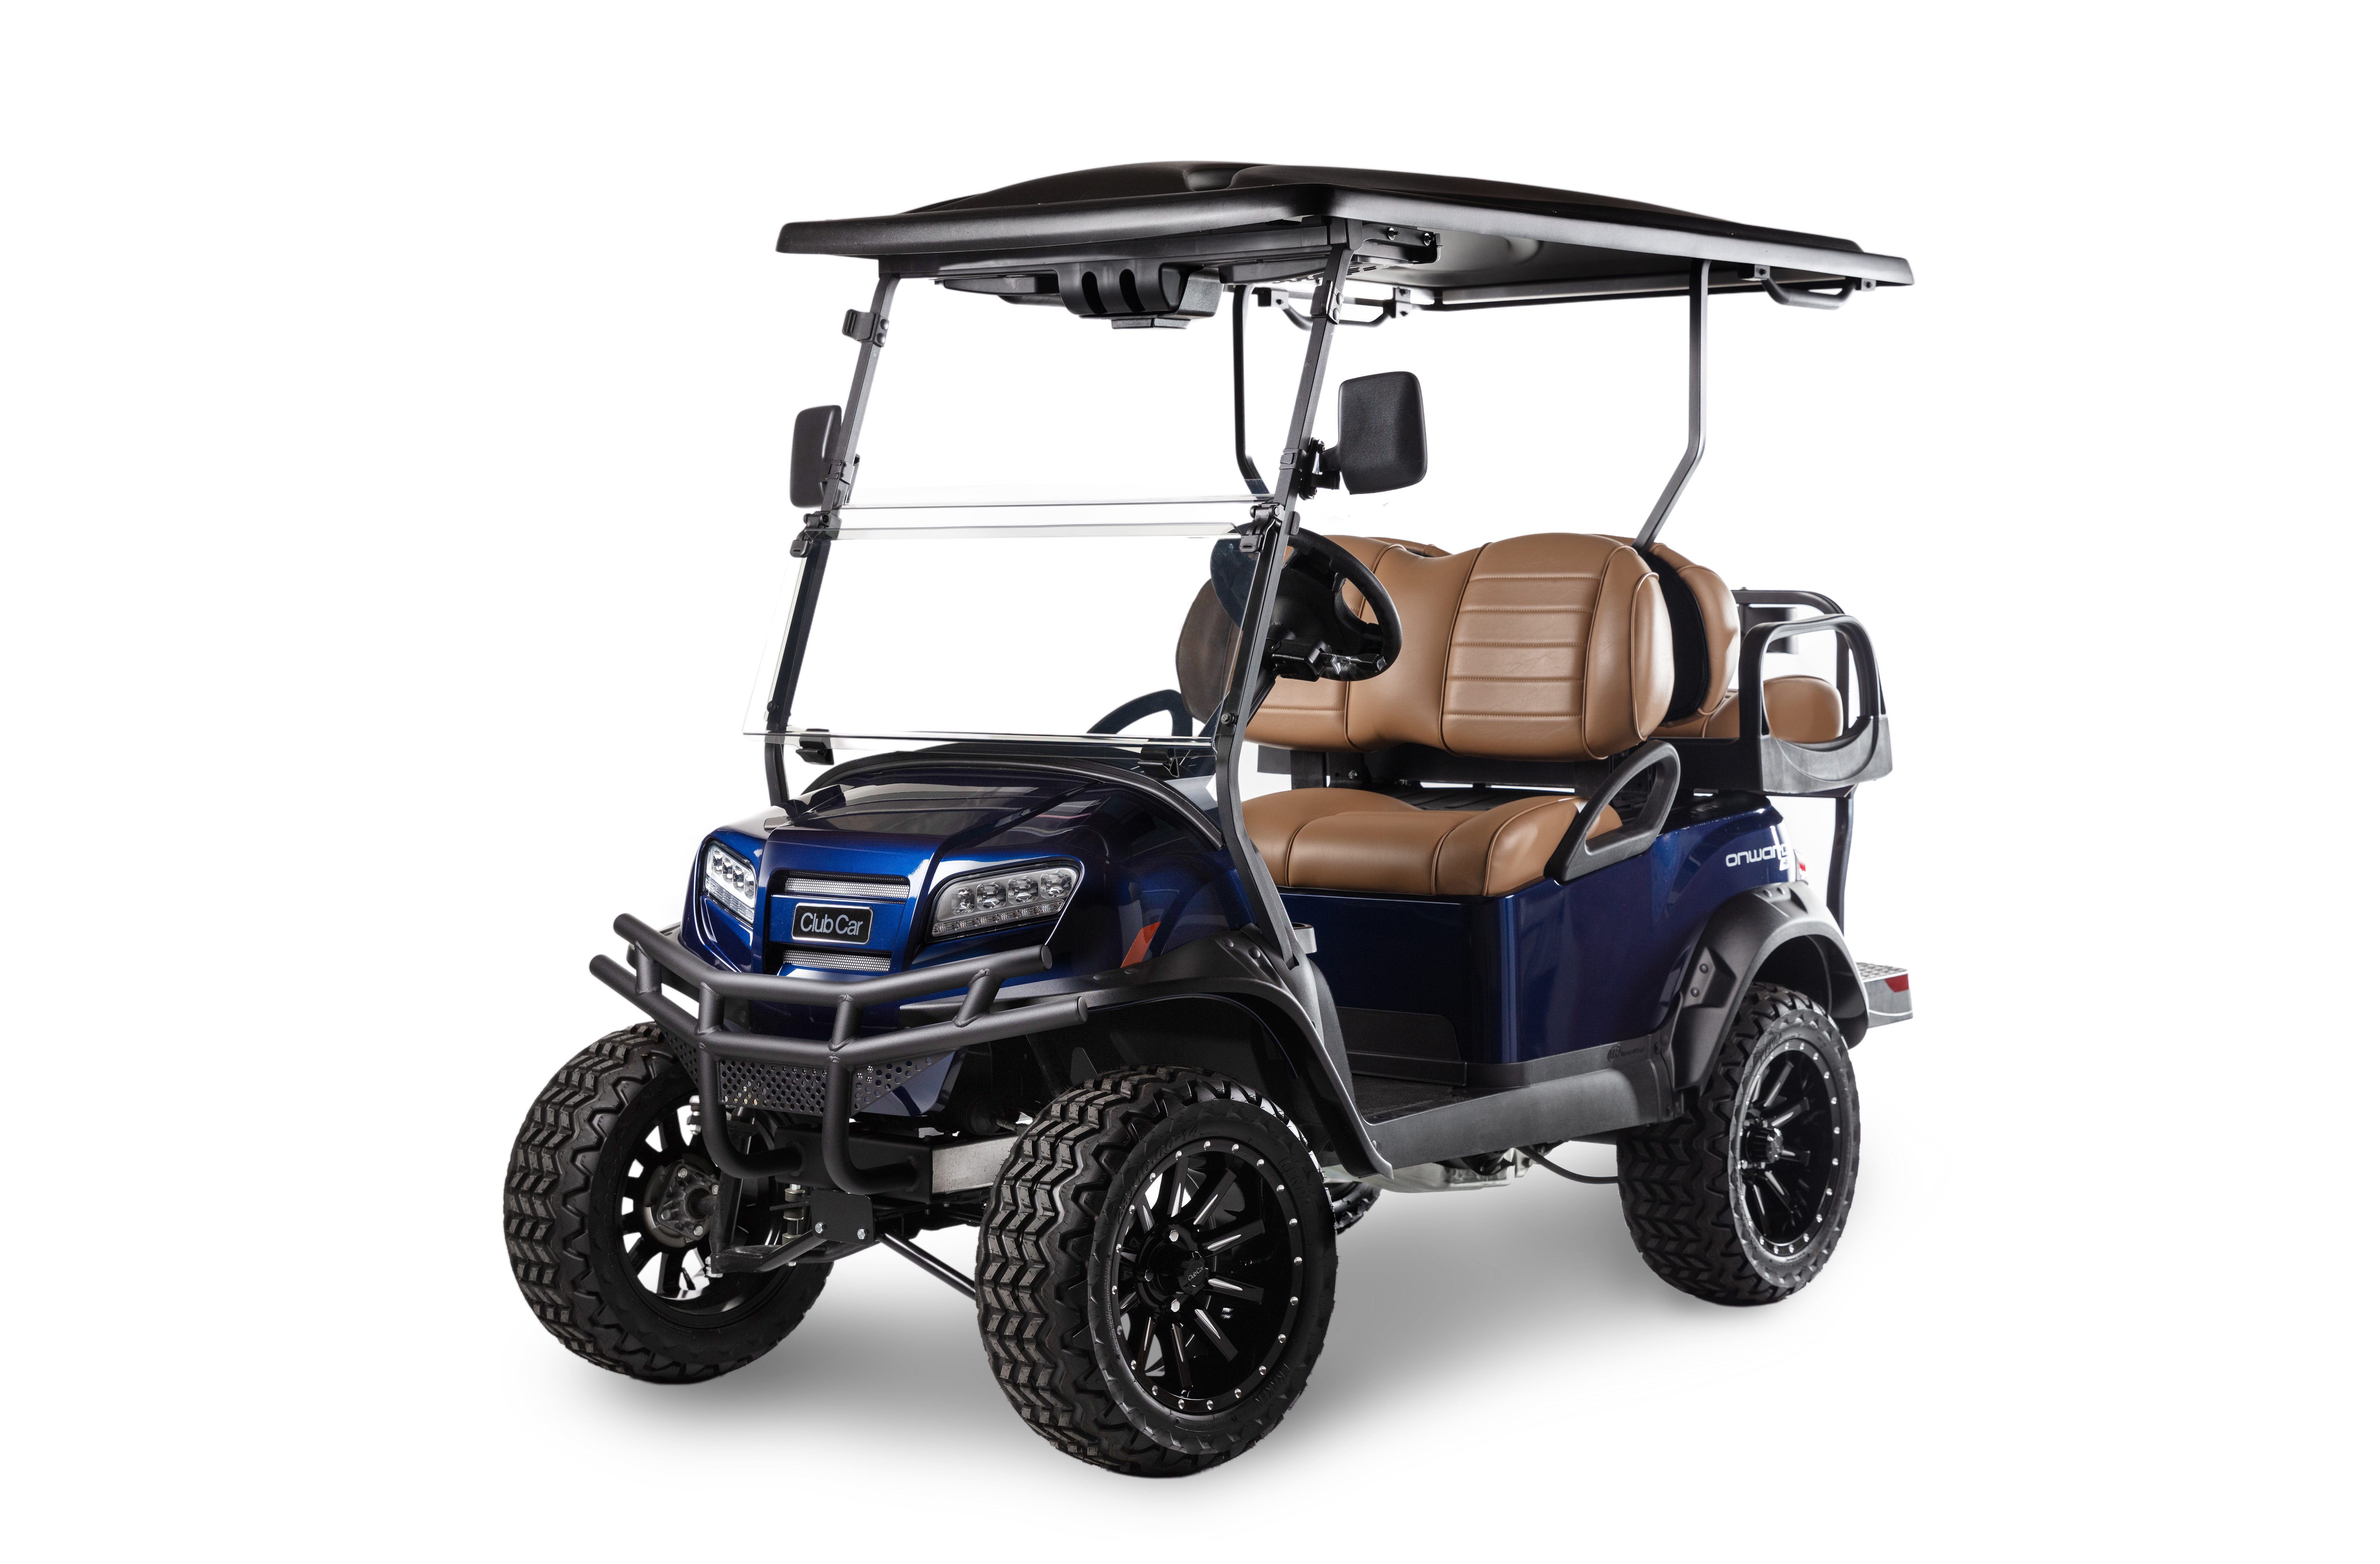 Golf Car Services – EZGO and Clubcar sales service and parts – Custom Golf  Cars and Premium Service for our clients